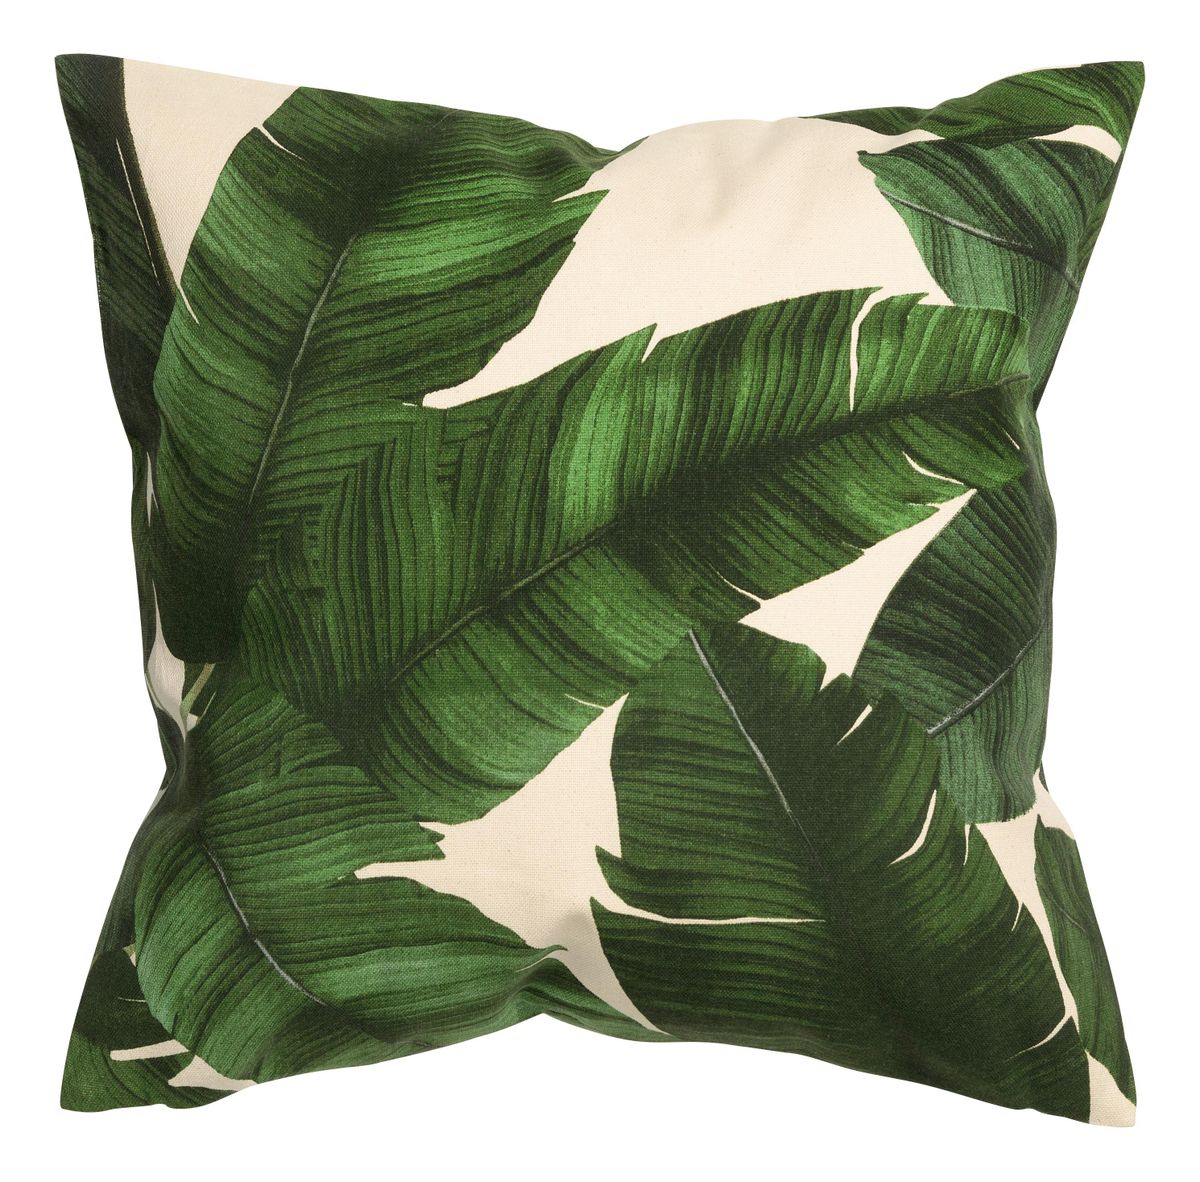 In this photo provided by H&M, a vintage style palm leaf print graces a chic throw pillow from H&M Home. (H&M via AP) ORG XMIT: NYLS145 (AP)